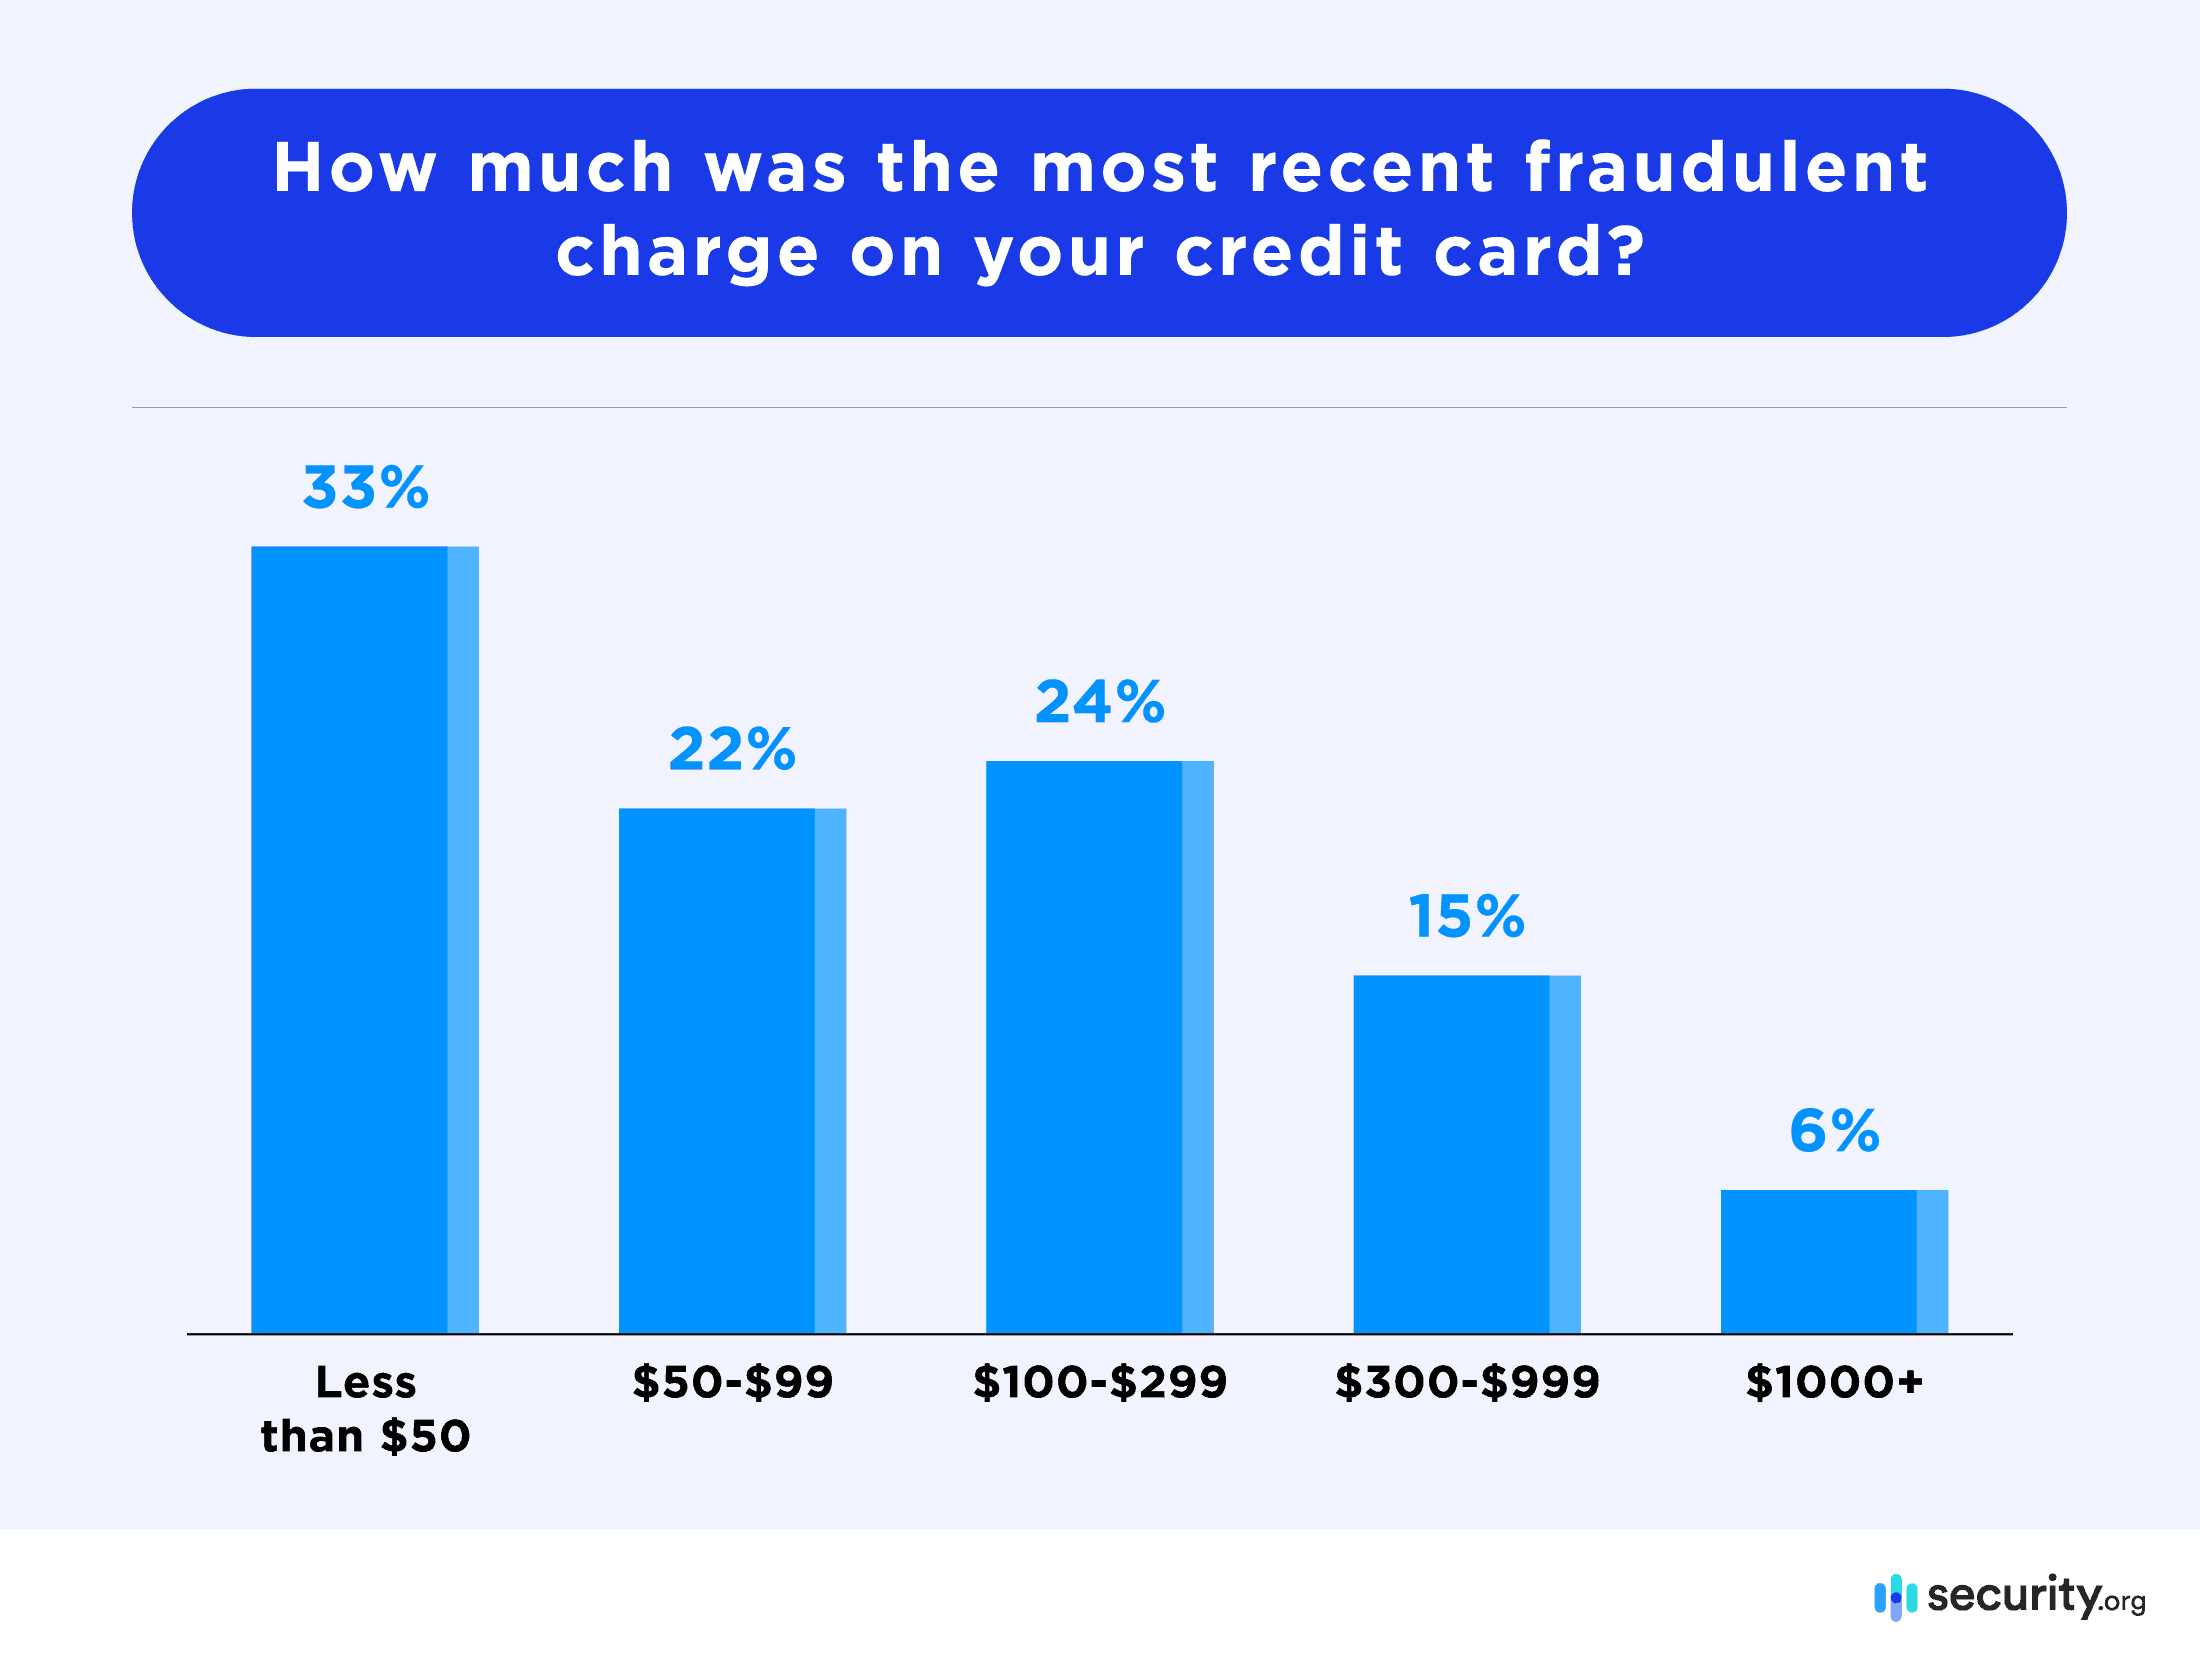 How much was the most recent fraudulent charge